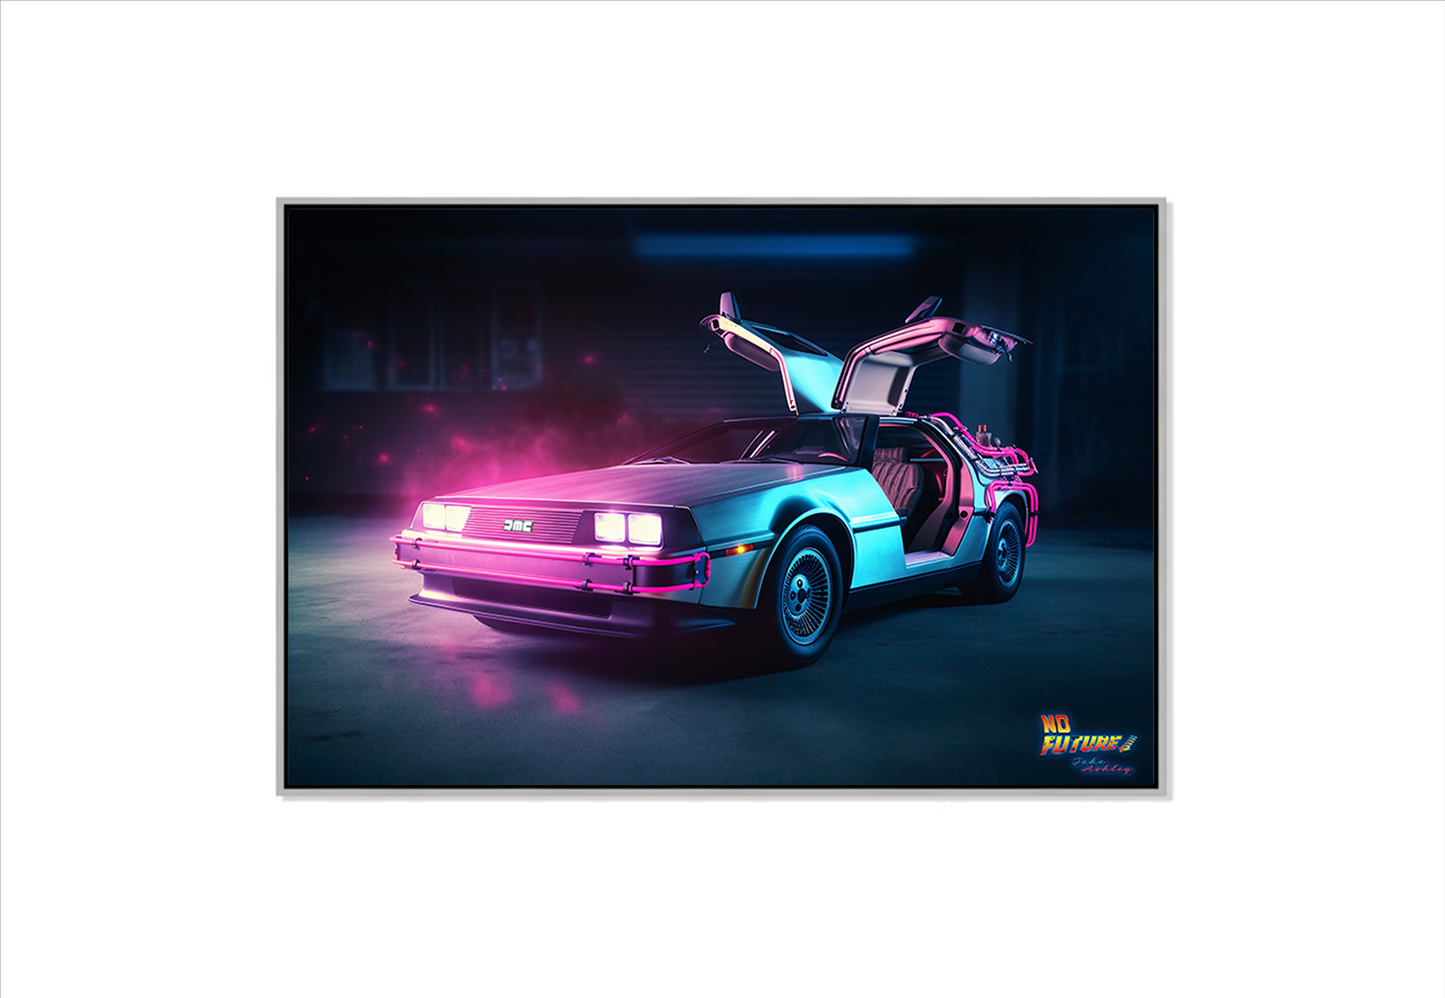 Neon DeLorean 24" x 36" limited Edition Acrylic Print in Stainless Steel Floating Frame